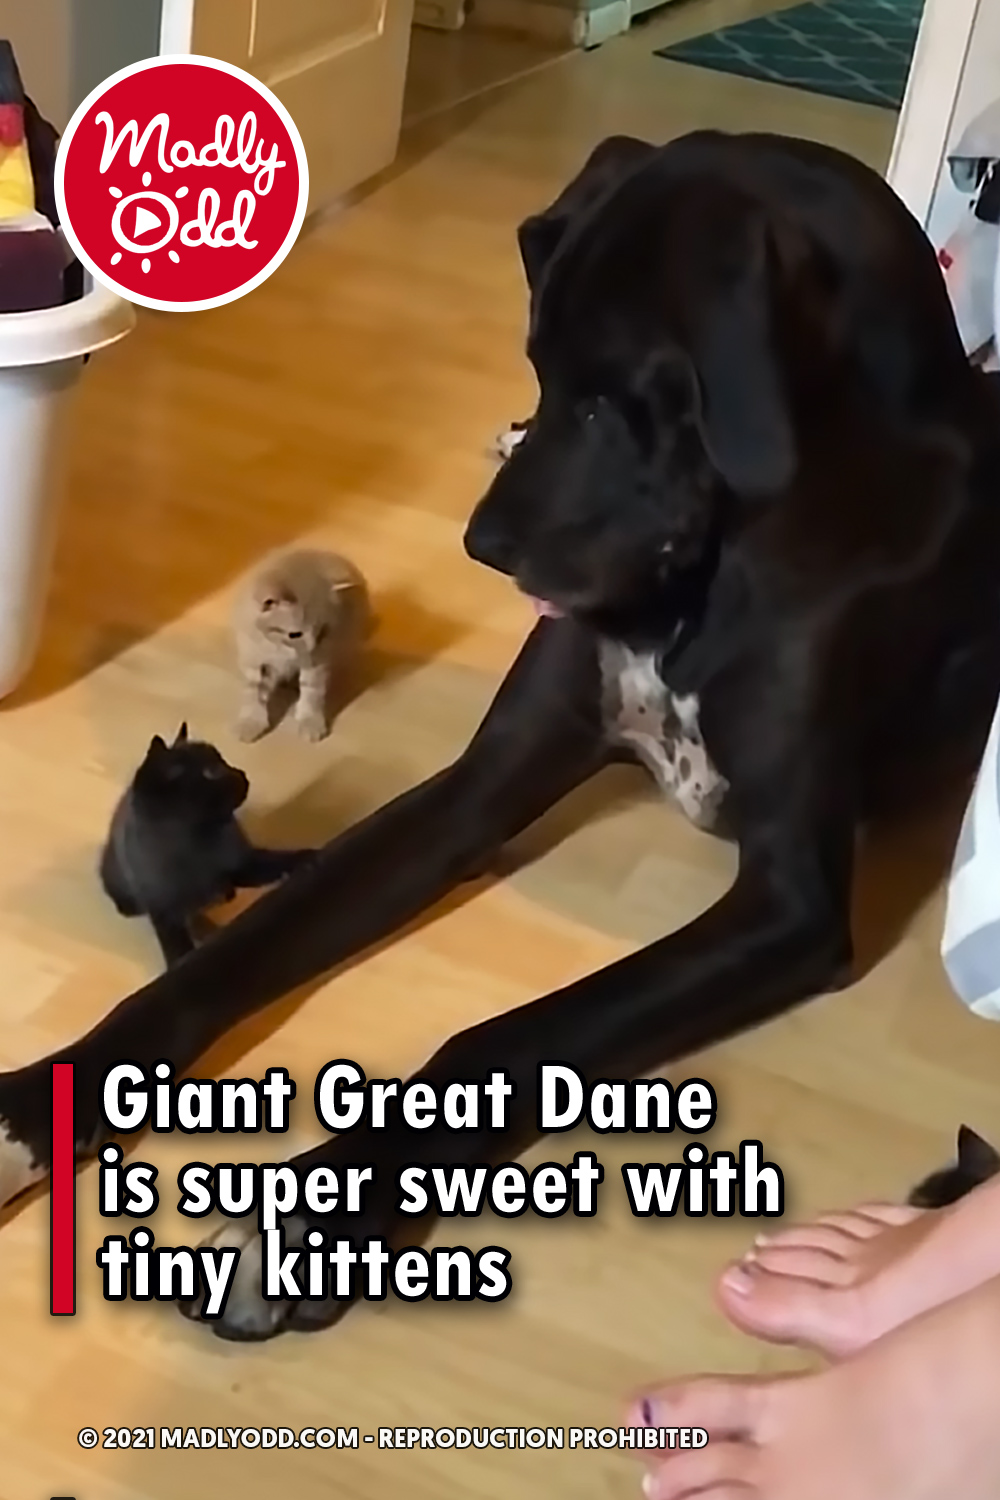 Giant Great Dane is super sweet with tiny kittens